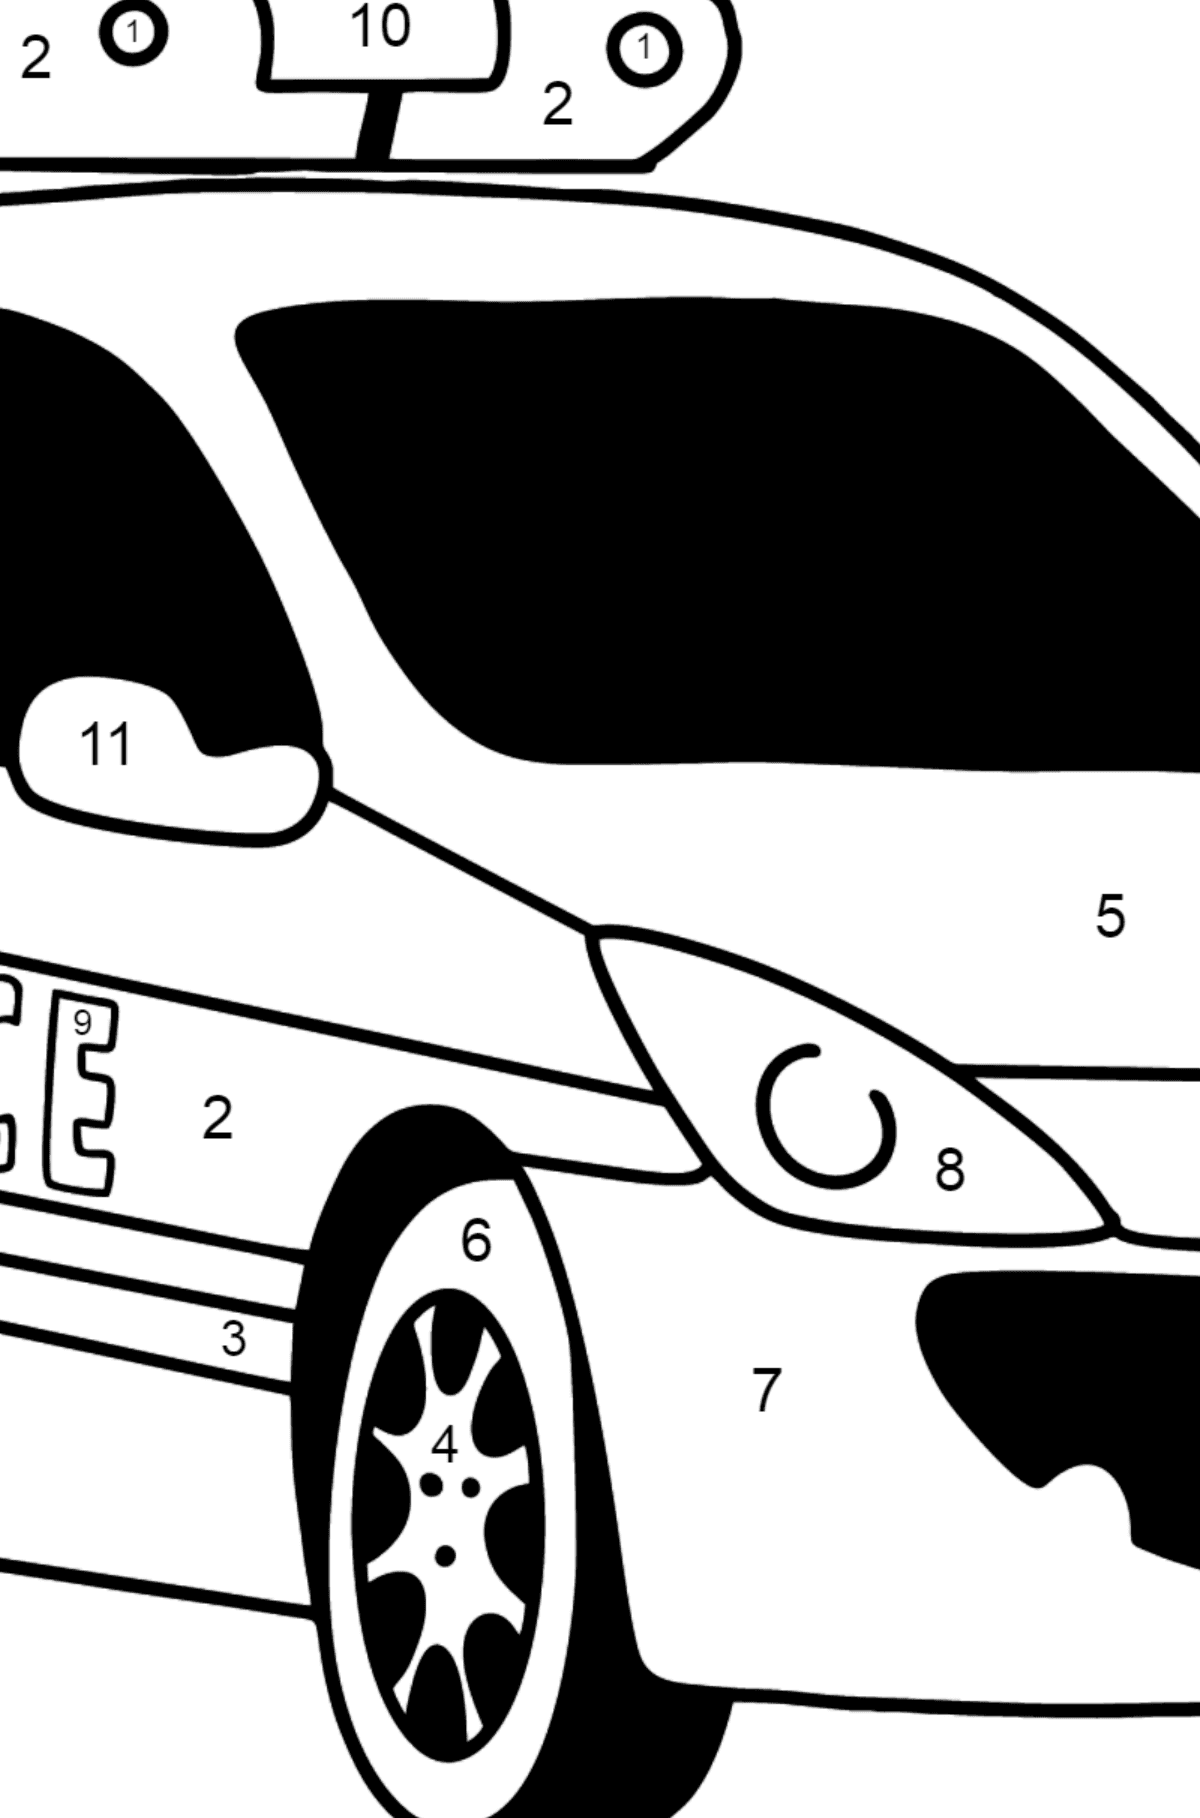 Police Car in France coloring page - Coloring by Numbers for Kids